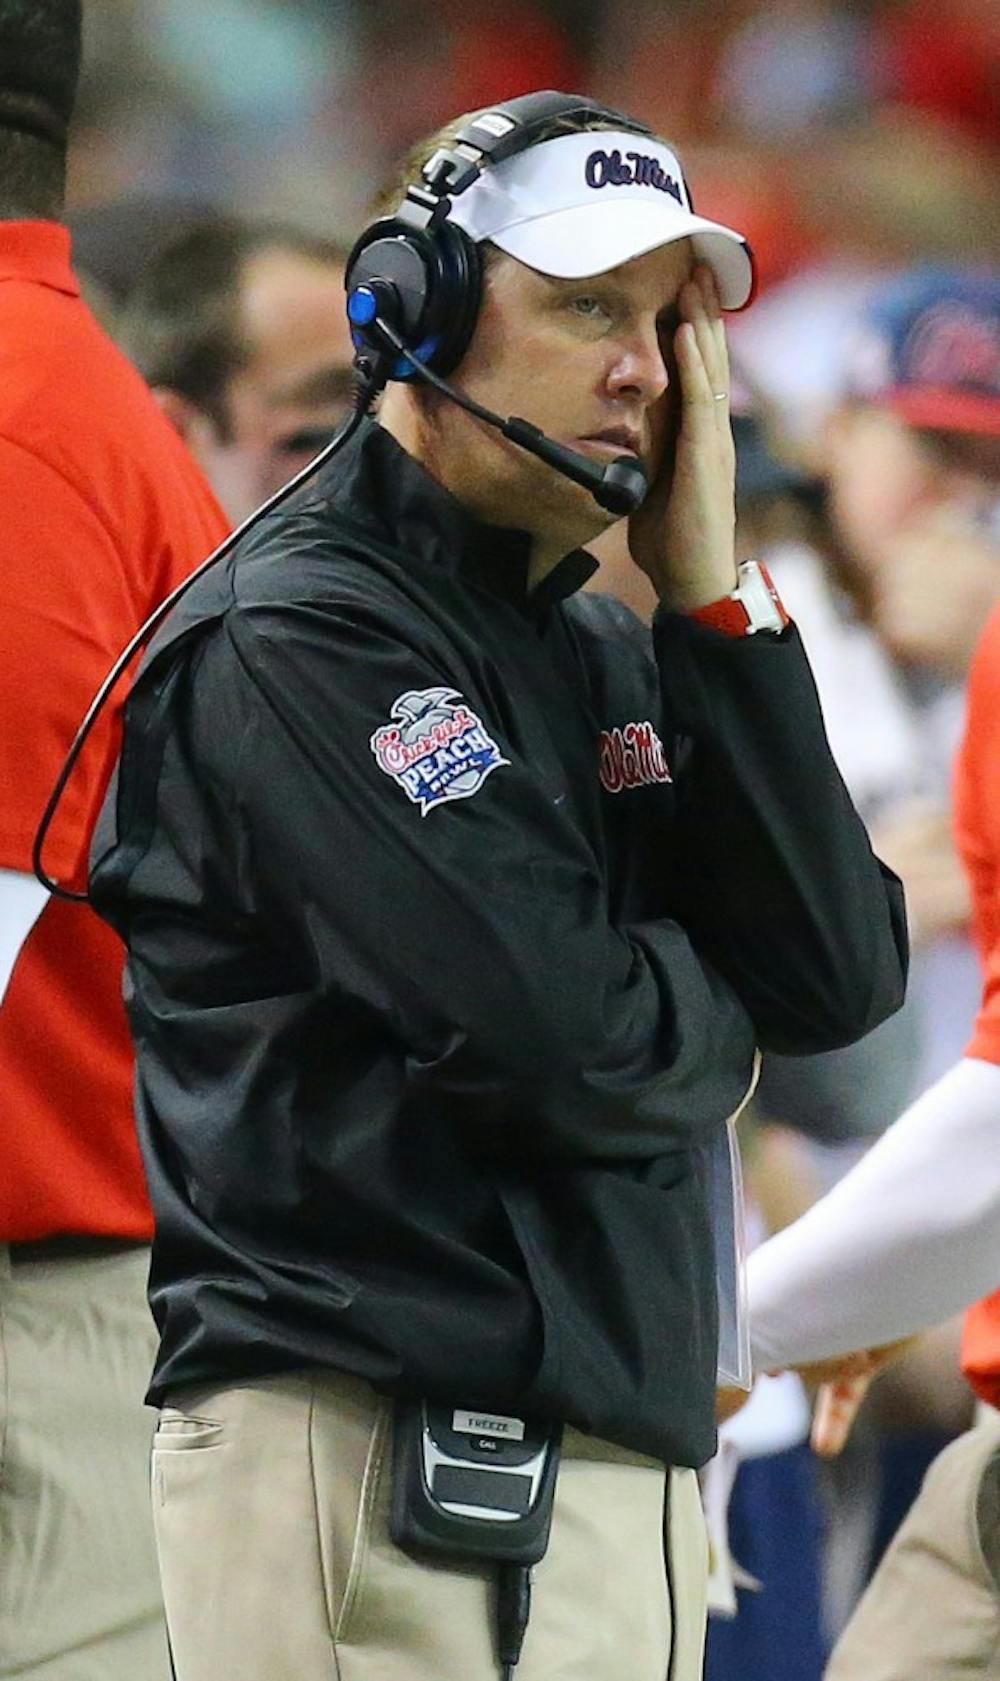 Ole Miss head coach Hugh Freeze looks on during the fourth quarter in a 42-3 loss to TCU in the Chick-fil-A Peach Bowl on Wednesday, Dec. 31, 2014, at Georgia Dome in Atlanta. (Curtis Compton/Atlanta Journal-Constitution/TNS)